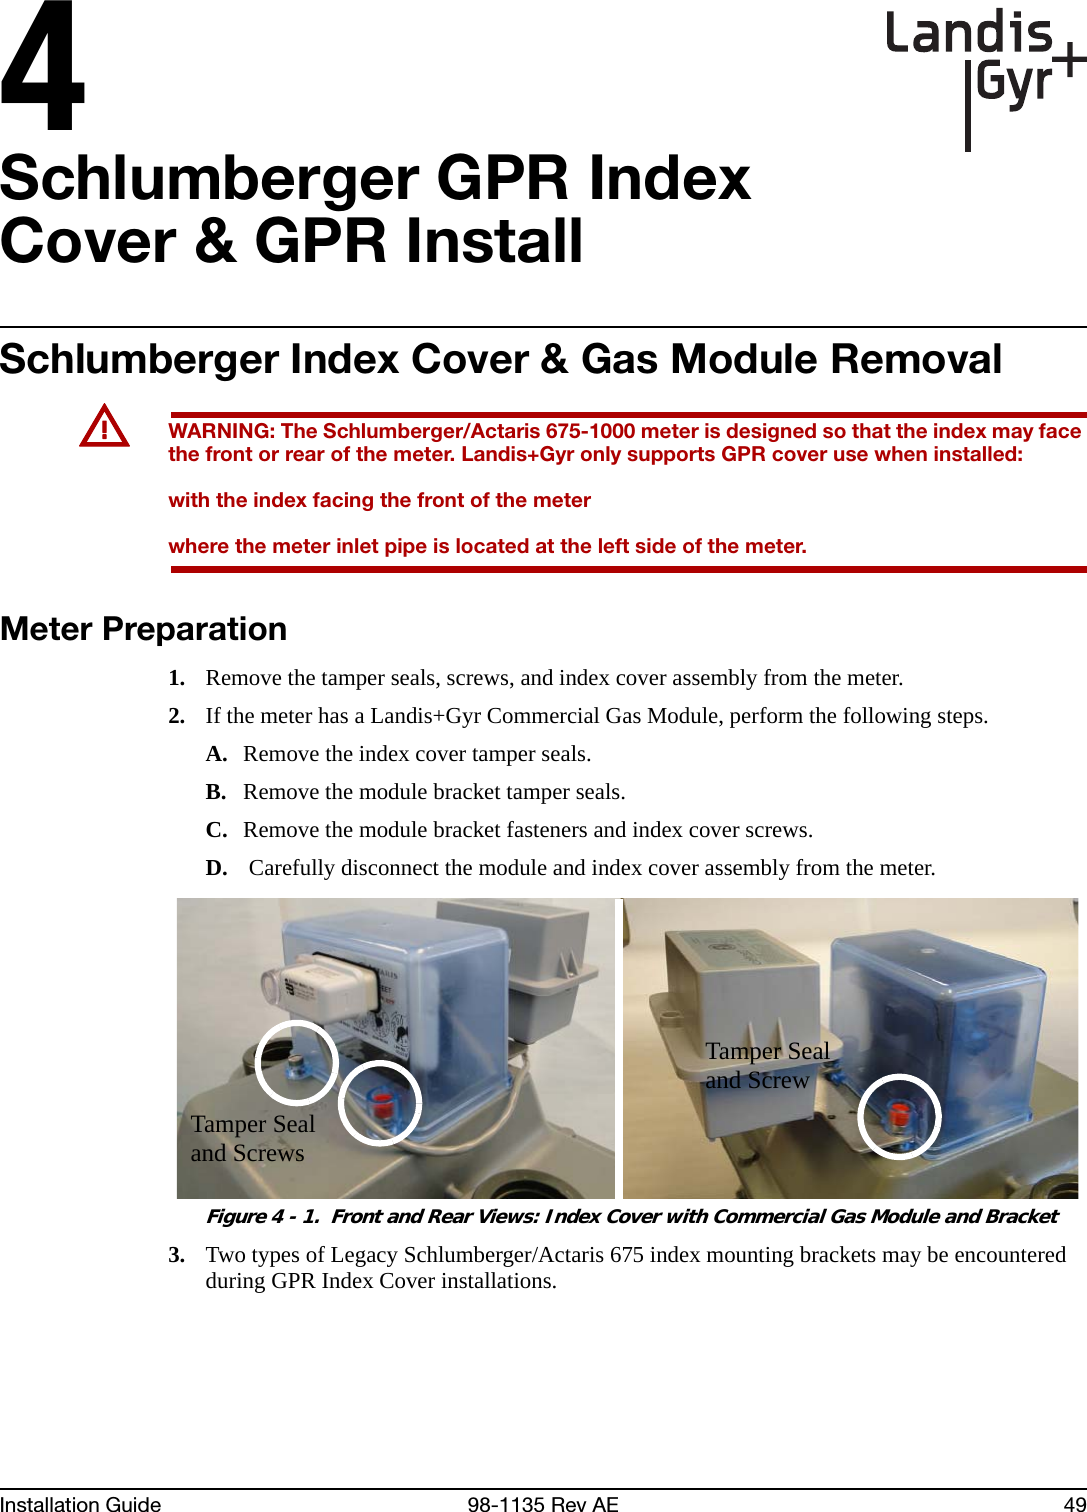 4Installation Guide 98-1135 Rev AE 49Schlumberger GPR Index Cover &amp; GPR InstallSchlumberger Index Cover &amp; Gas Module RemovalUWARNING: The Schlumberger/Actaris 675-1000 meter is designed so that the index may face the front or rear of the meter. Landis+Gyr only supports GPR cover use when installed:with the index facing the front of the meterwhere the meter inlet pipe is located at the left side of the meter.Meter Preparation1. Remove the tamper seals, screws, and index cover assembly from the meter.2. If the meter has a Landis+Gyr Commercial Gas Module, perform the following steps.A. Remove the index cover tamper seals.B. Remove the module bracket tamper seals.C. Remove the module bracket fasteners and index cover screws.D.  Carefully disconnect the module and index cover assembly from the meter. Figure 4 - 1.  Front and Rear Views: Index Cover with Commercial Gas Module and Bracket3. Two types of Legacy Schlumberger/Actaris 675 index mounting brackets may be encountered during GPR Index Cover installations.Tamper Seal and ScrewTamper Seal and Screws